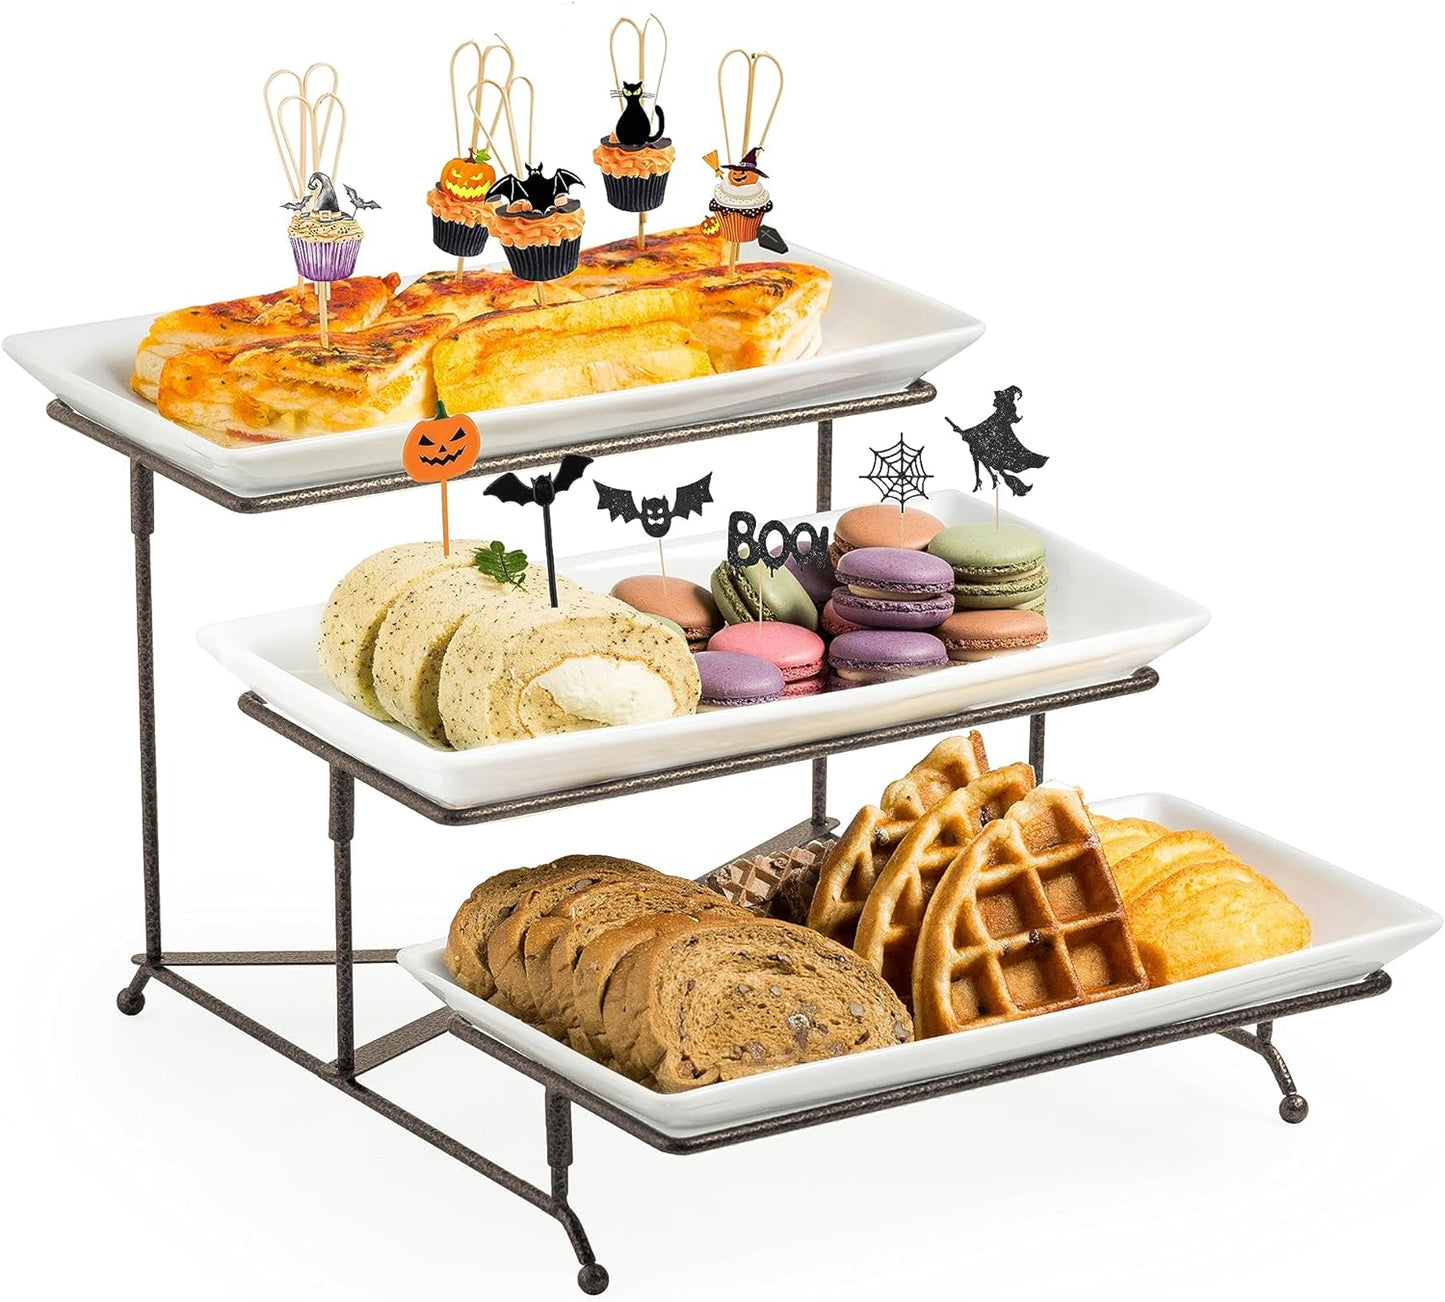 3 Tier Serving Stand Collapsible Sturdier Rack with 3 Porcelain Serving Platters Tier Serving Trays for Fruit Dessert Presentation Halloween Party Display Set, 12 Inch, Bronze